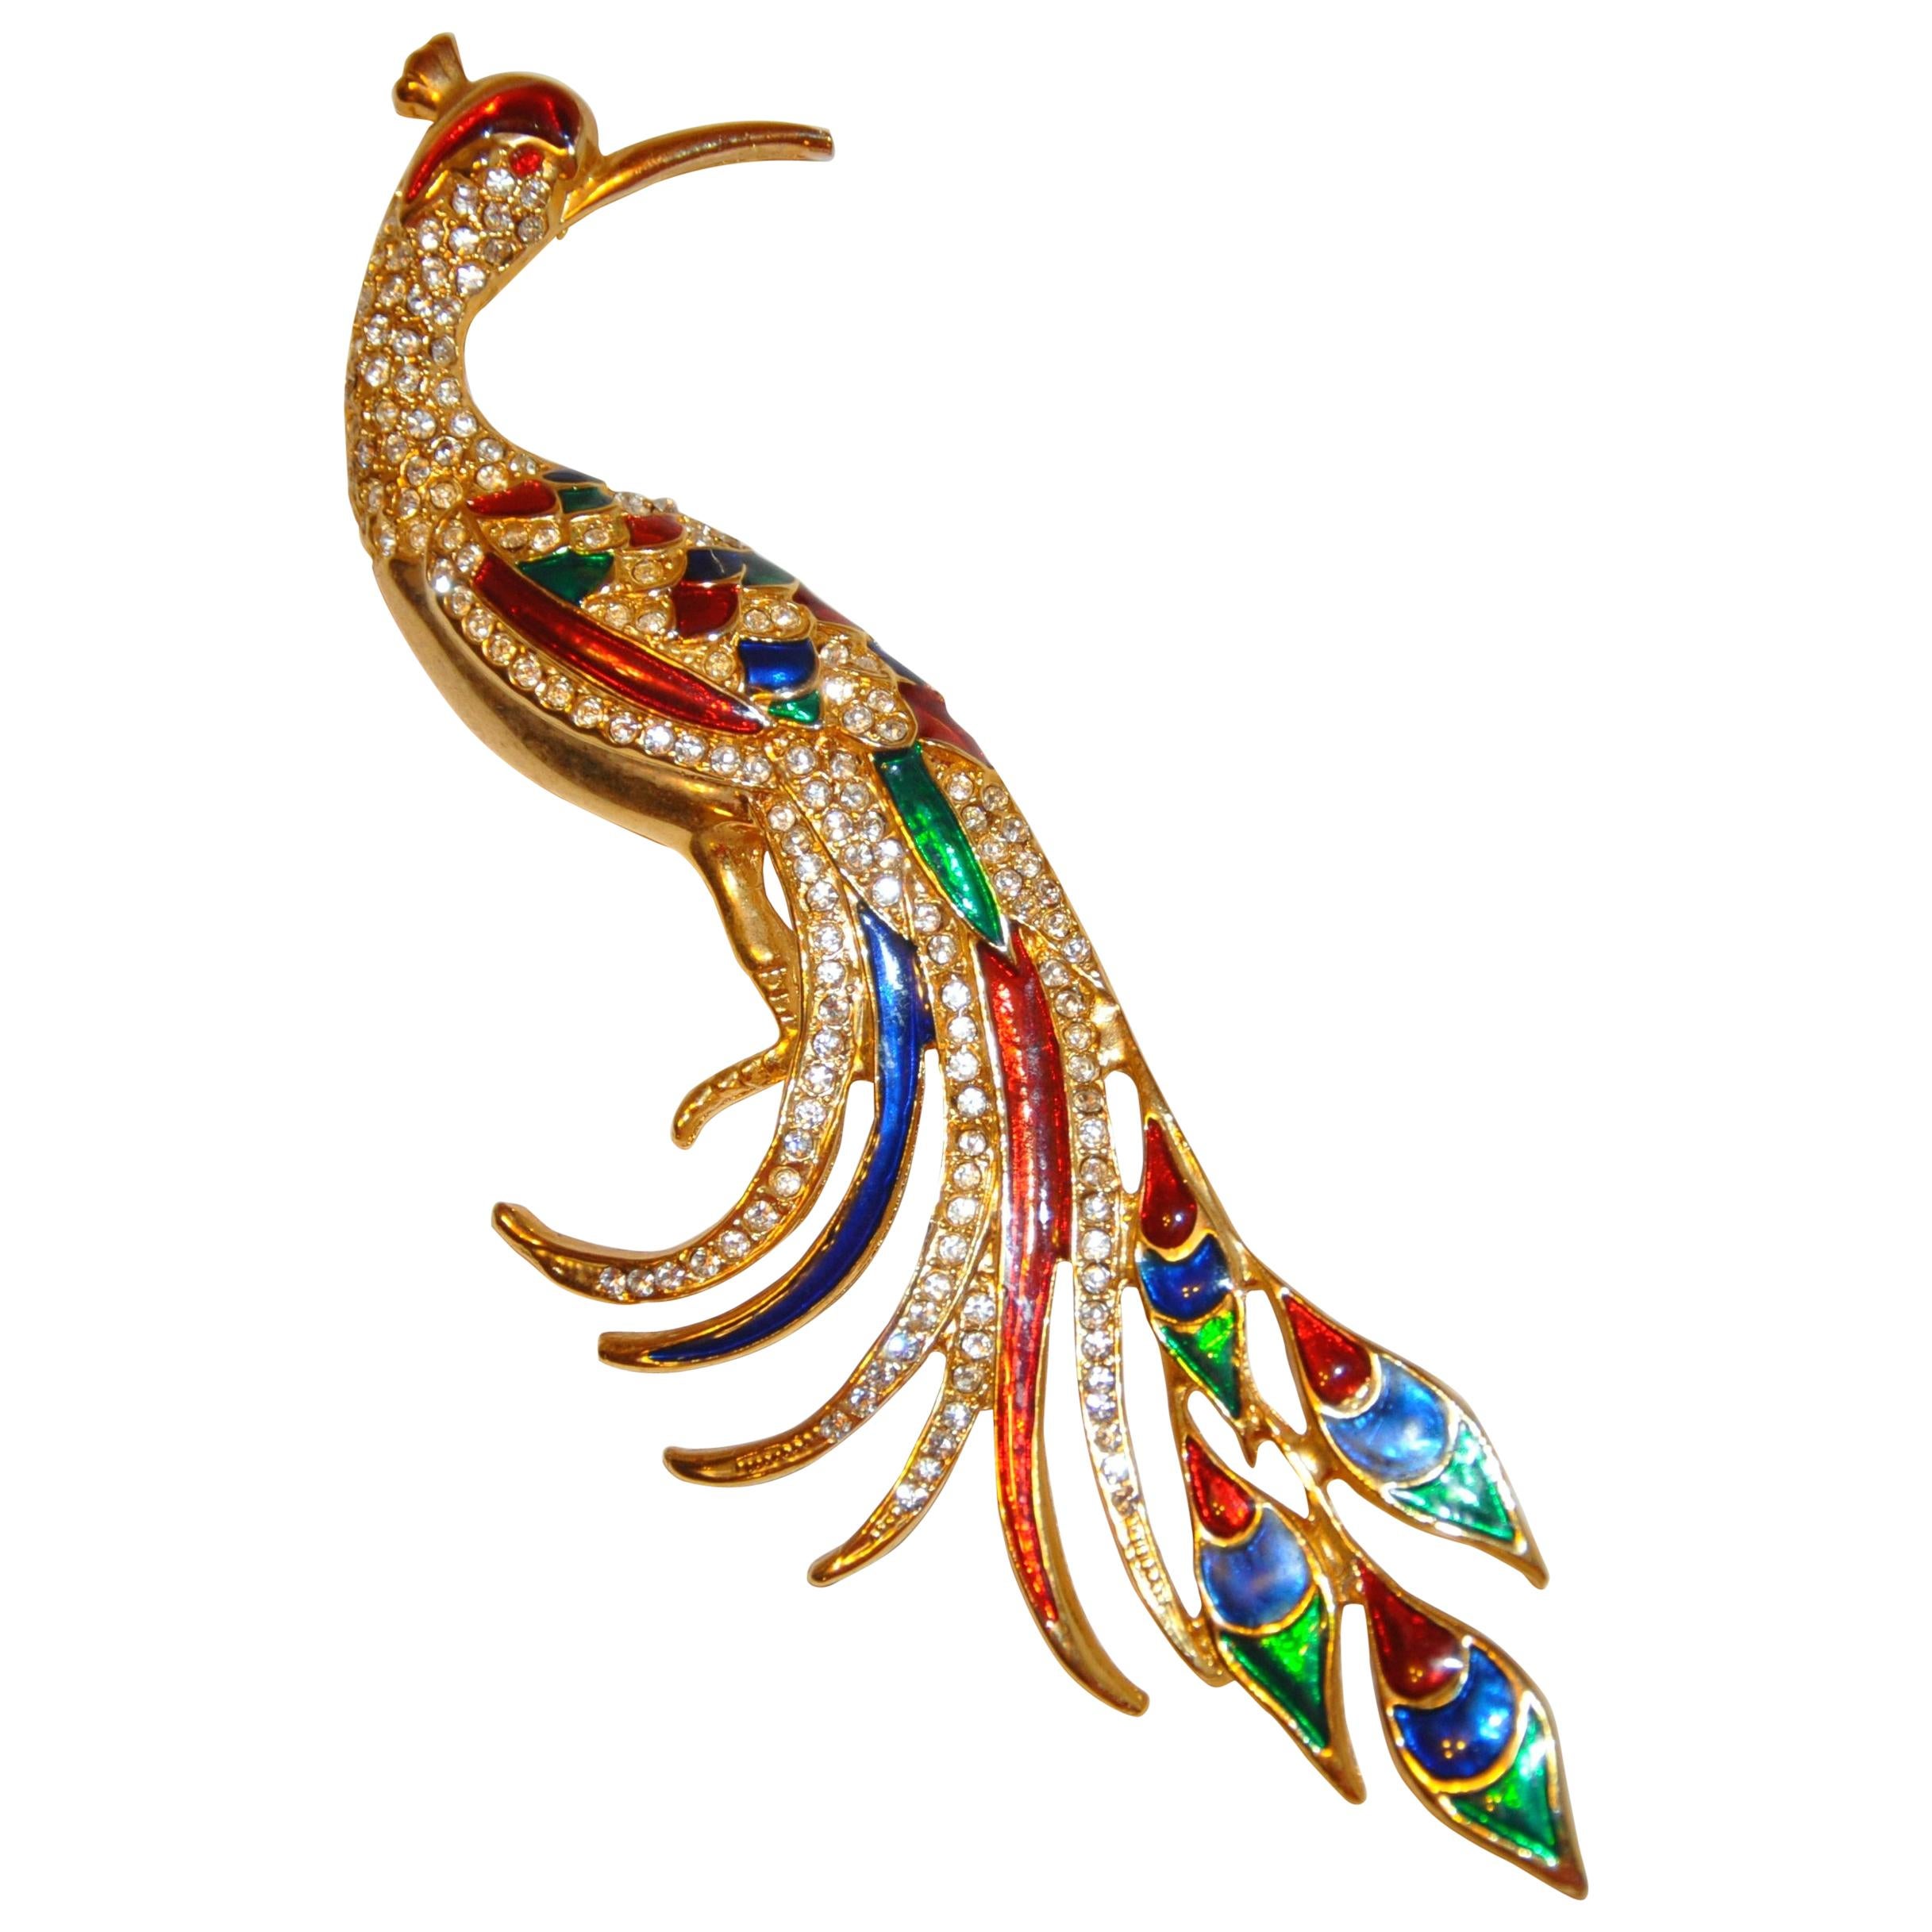 Huge Magnificent Multi-Color Enamel and Faux Diamonds "Peacock" Brooch For Sale